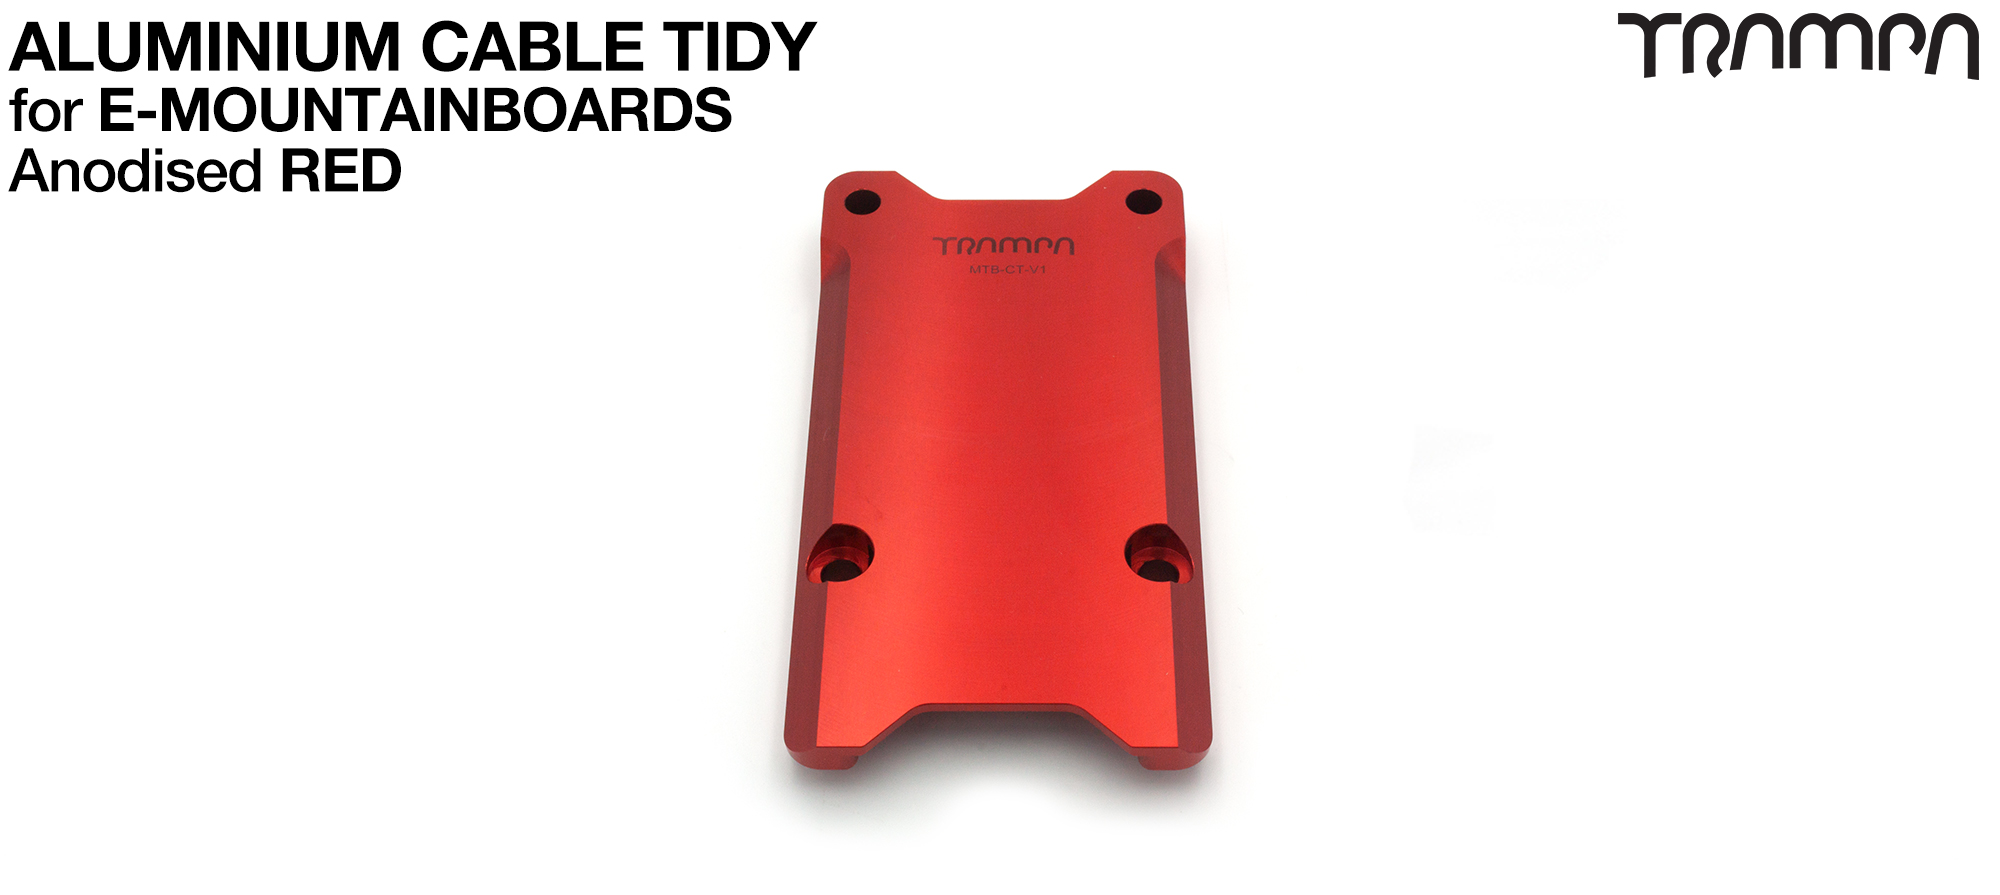 REAR CABLE Router Anodised - RED 